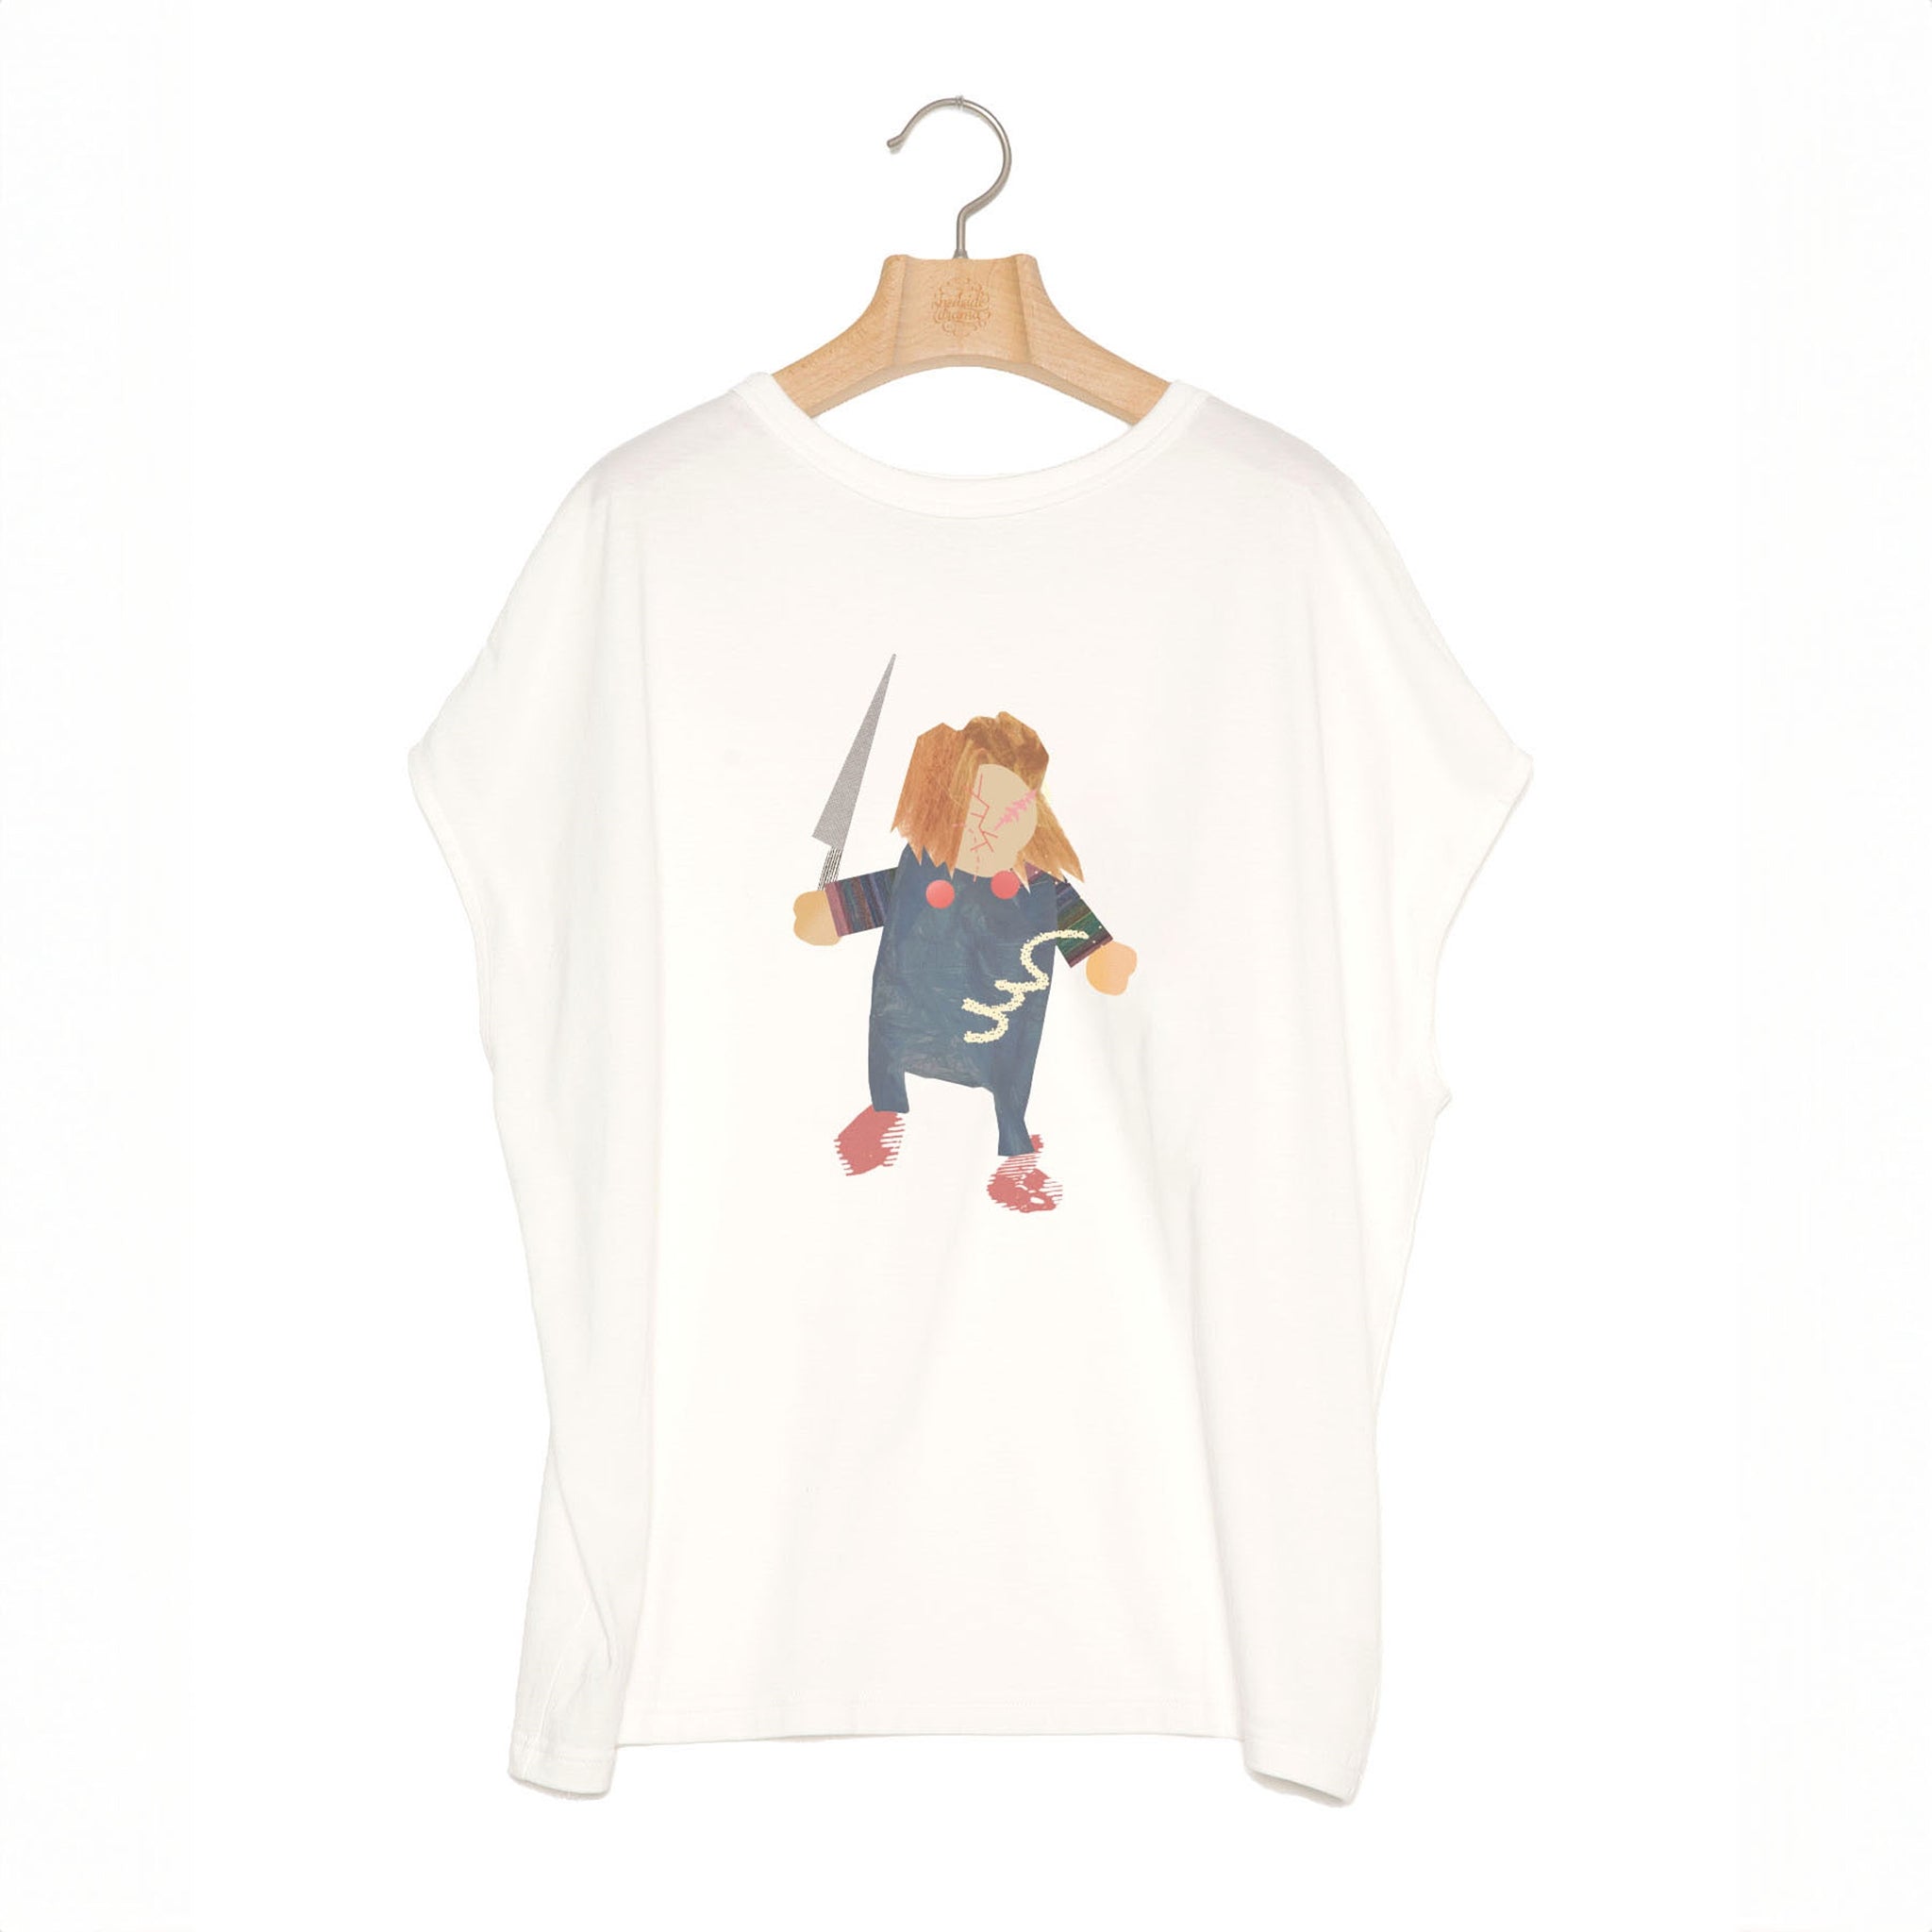 No:bsd24SS-19HW | Name:UnKnown Tee/The Doll | Color:White【BEDSIDEDRAMA_ベッドサイドドラマ】【入荷予定アイテム・入荷連絡可能】